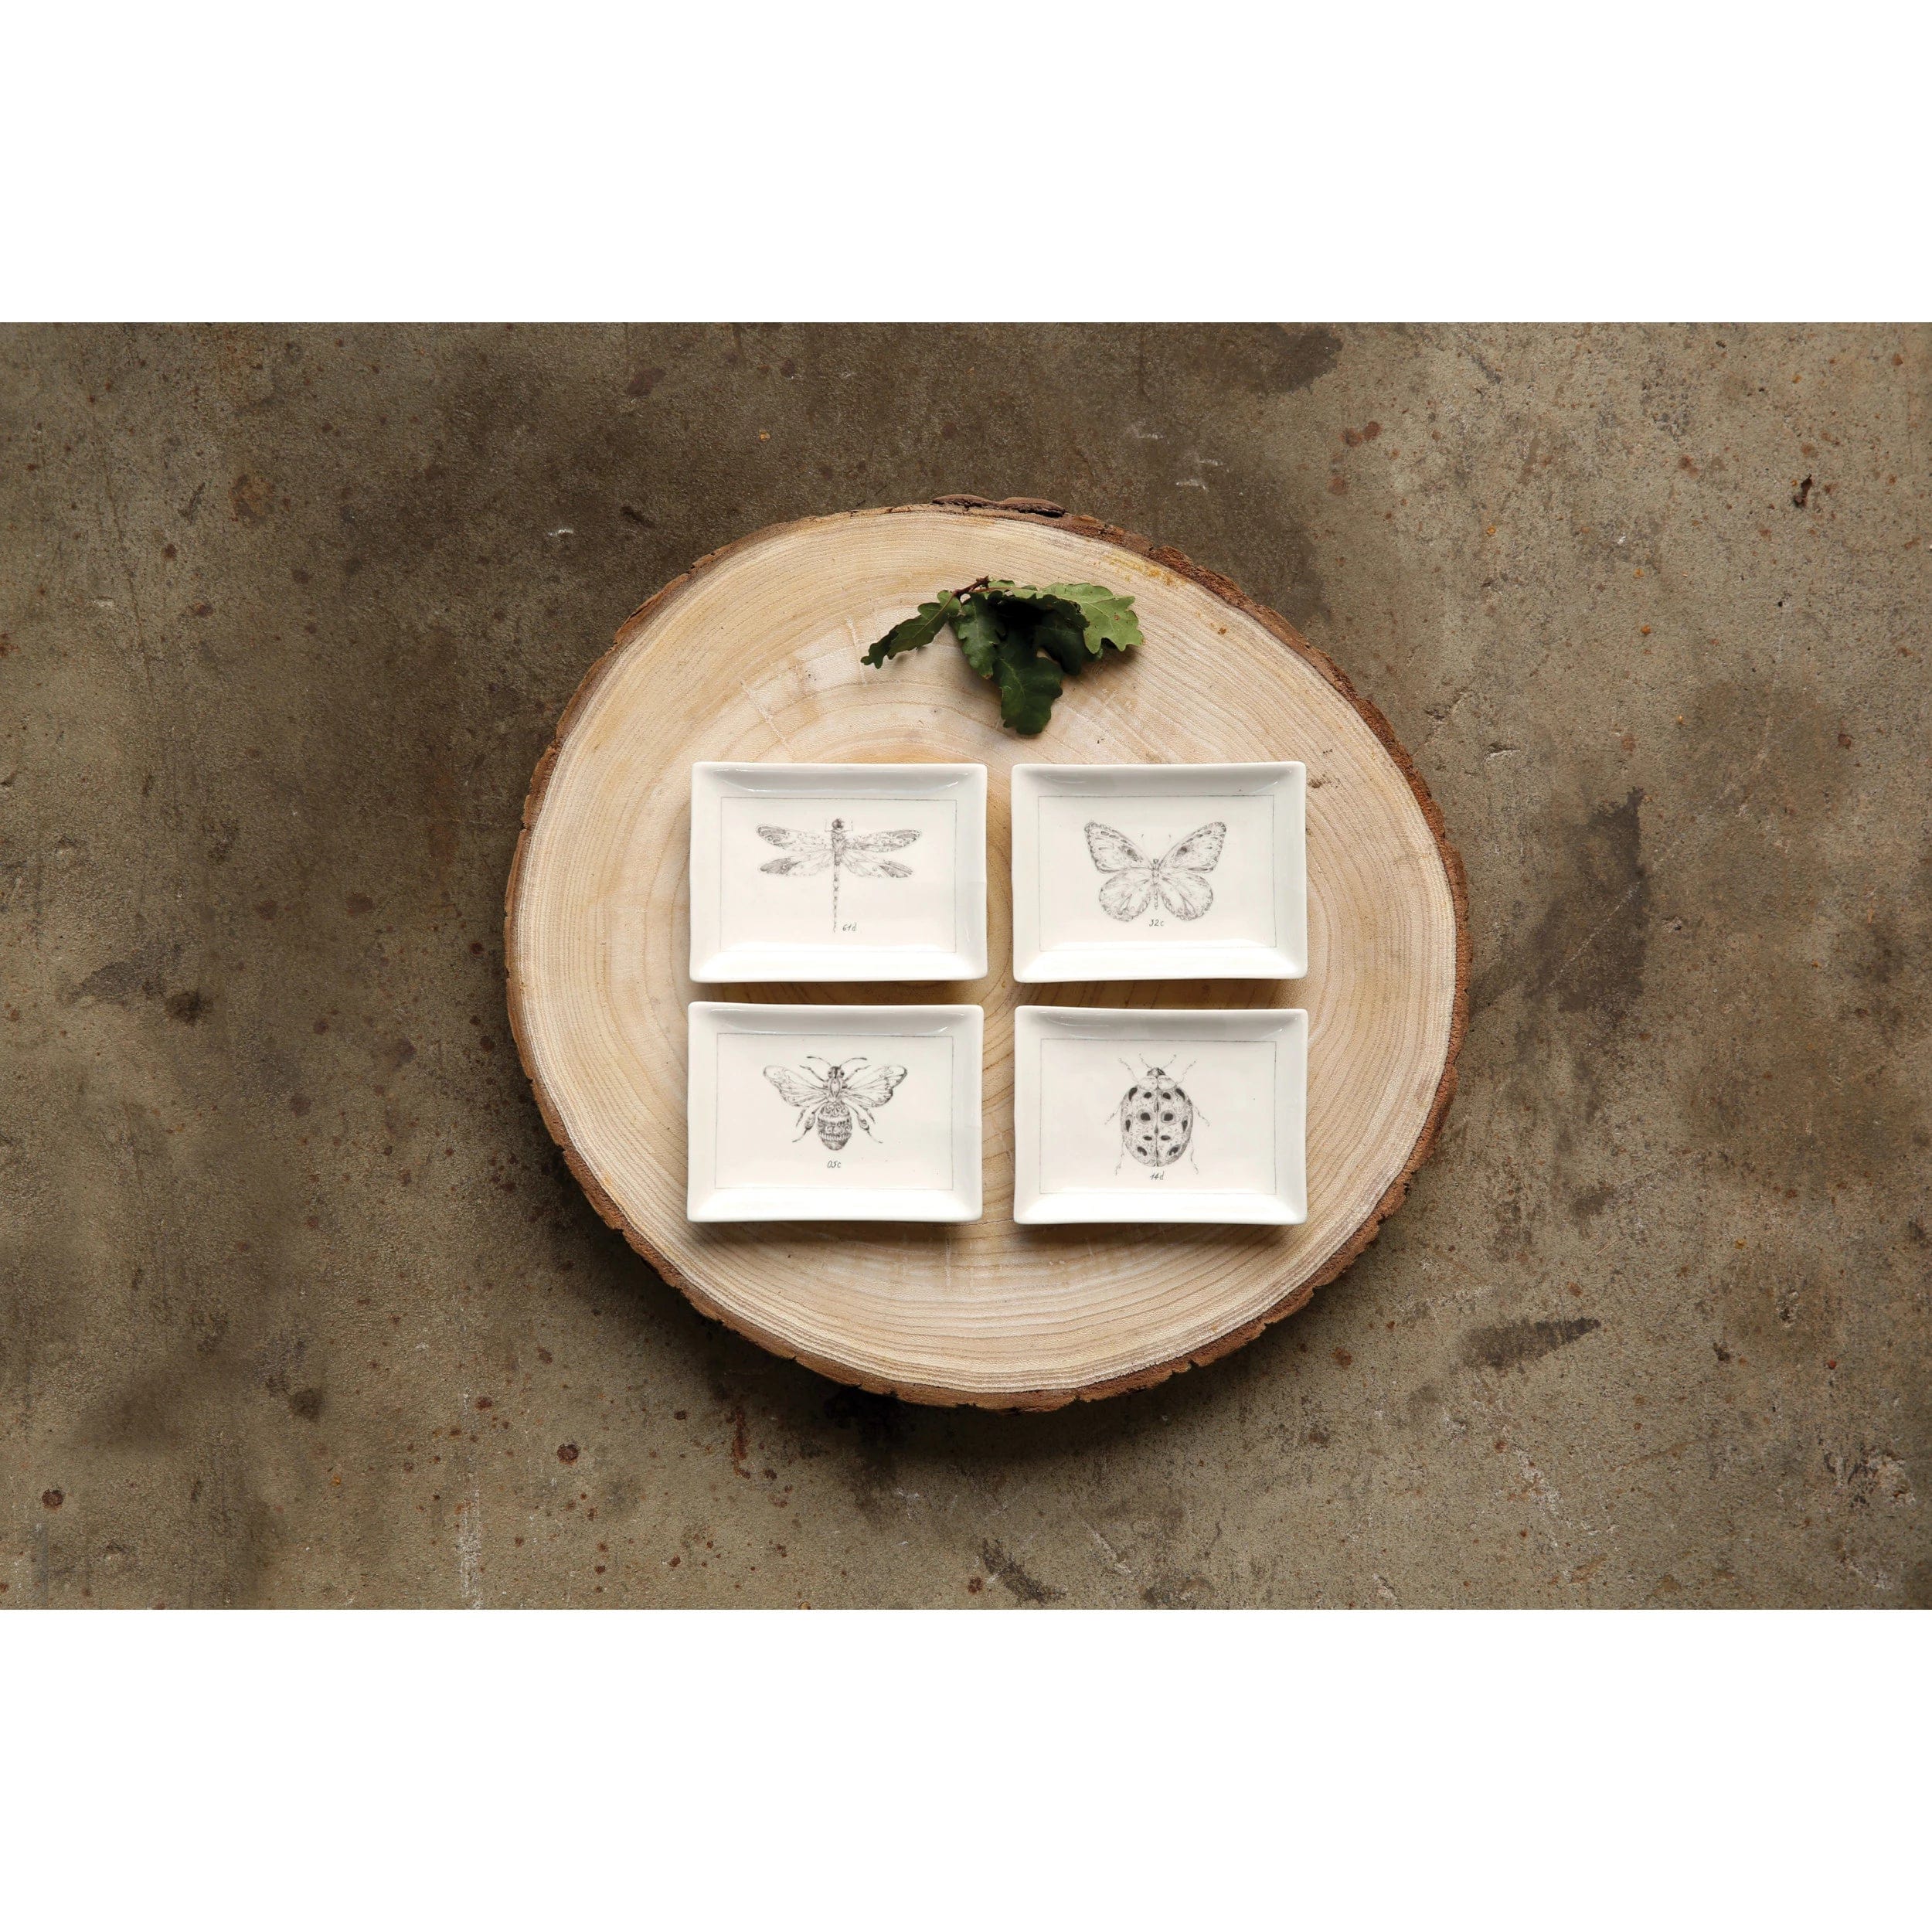 Creative Co-Op Creative Co-op Ceramic Dish with Insect 4 Styles - Little Miss Muffin Children & Home